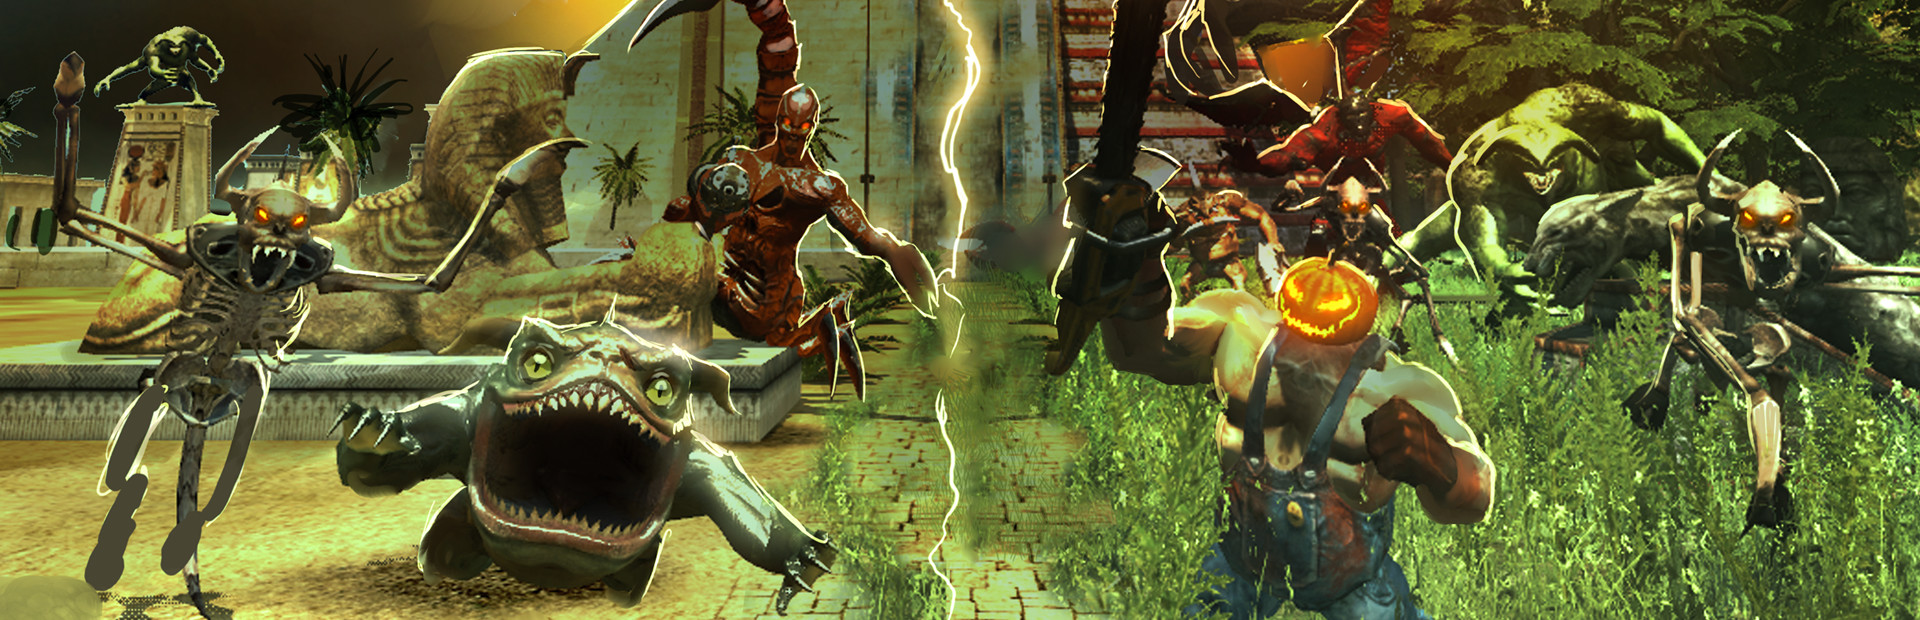 Serious Sam HD: The Second Encounter cover image